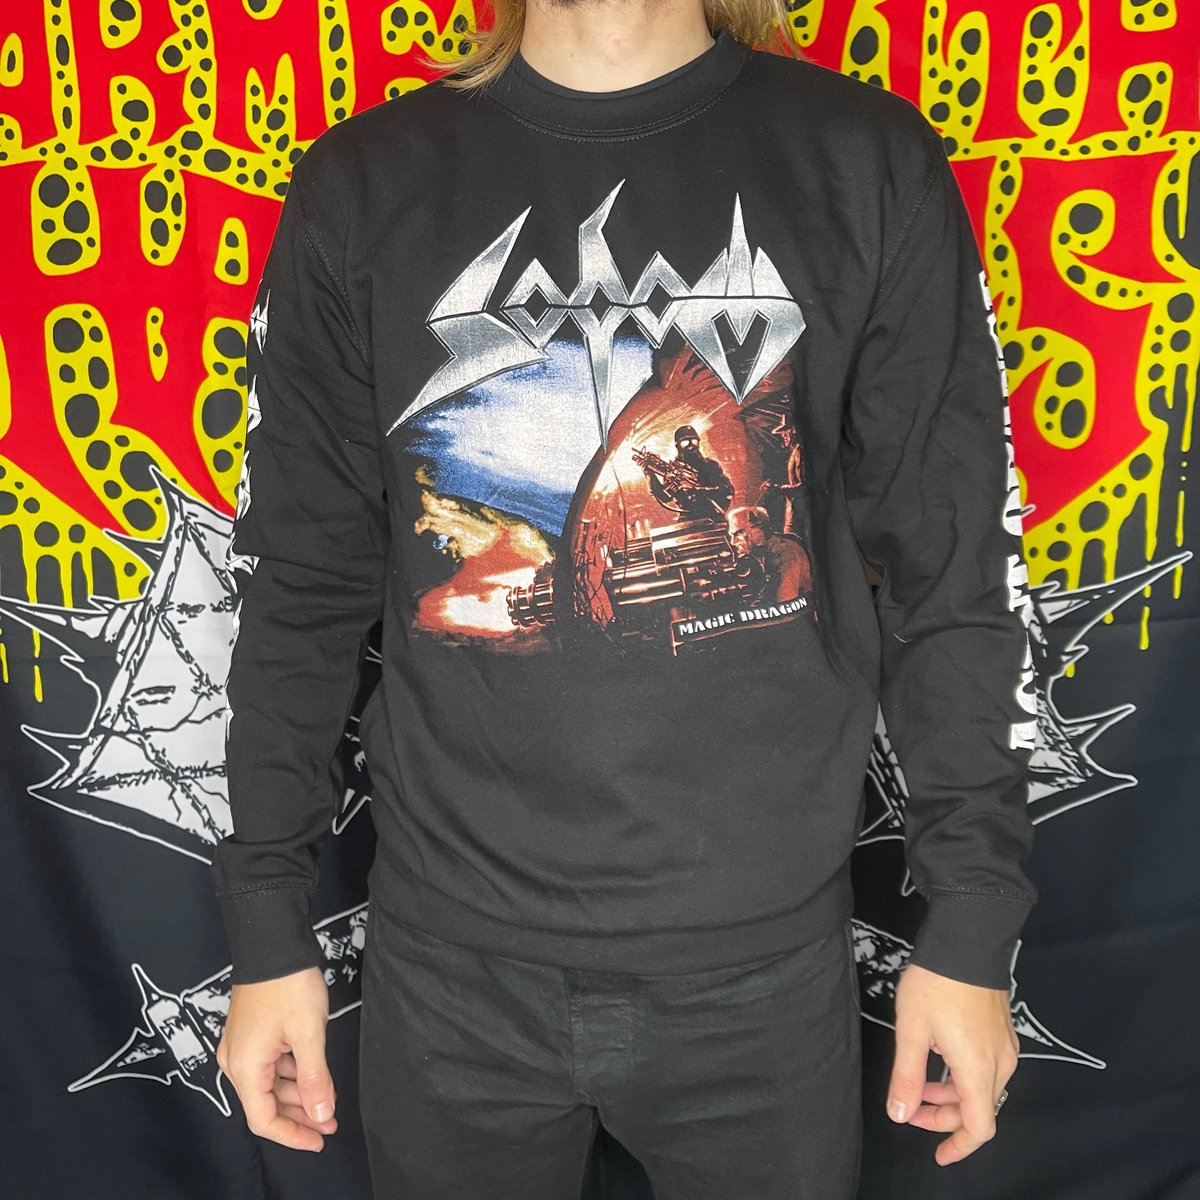 Sodom - Agent Orange CREWNECK | Armed With Hammers Productions